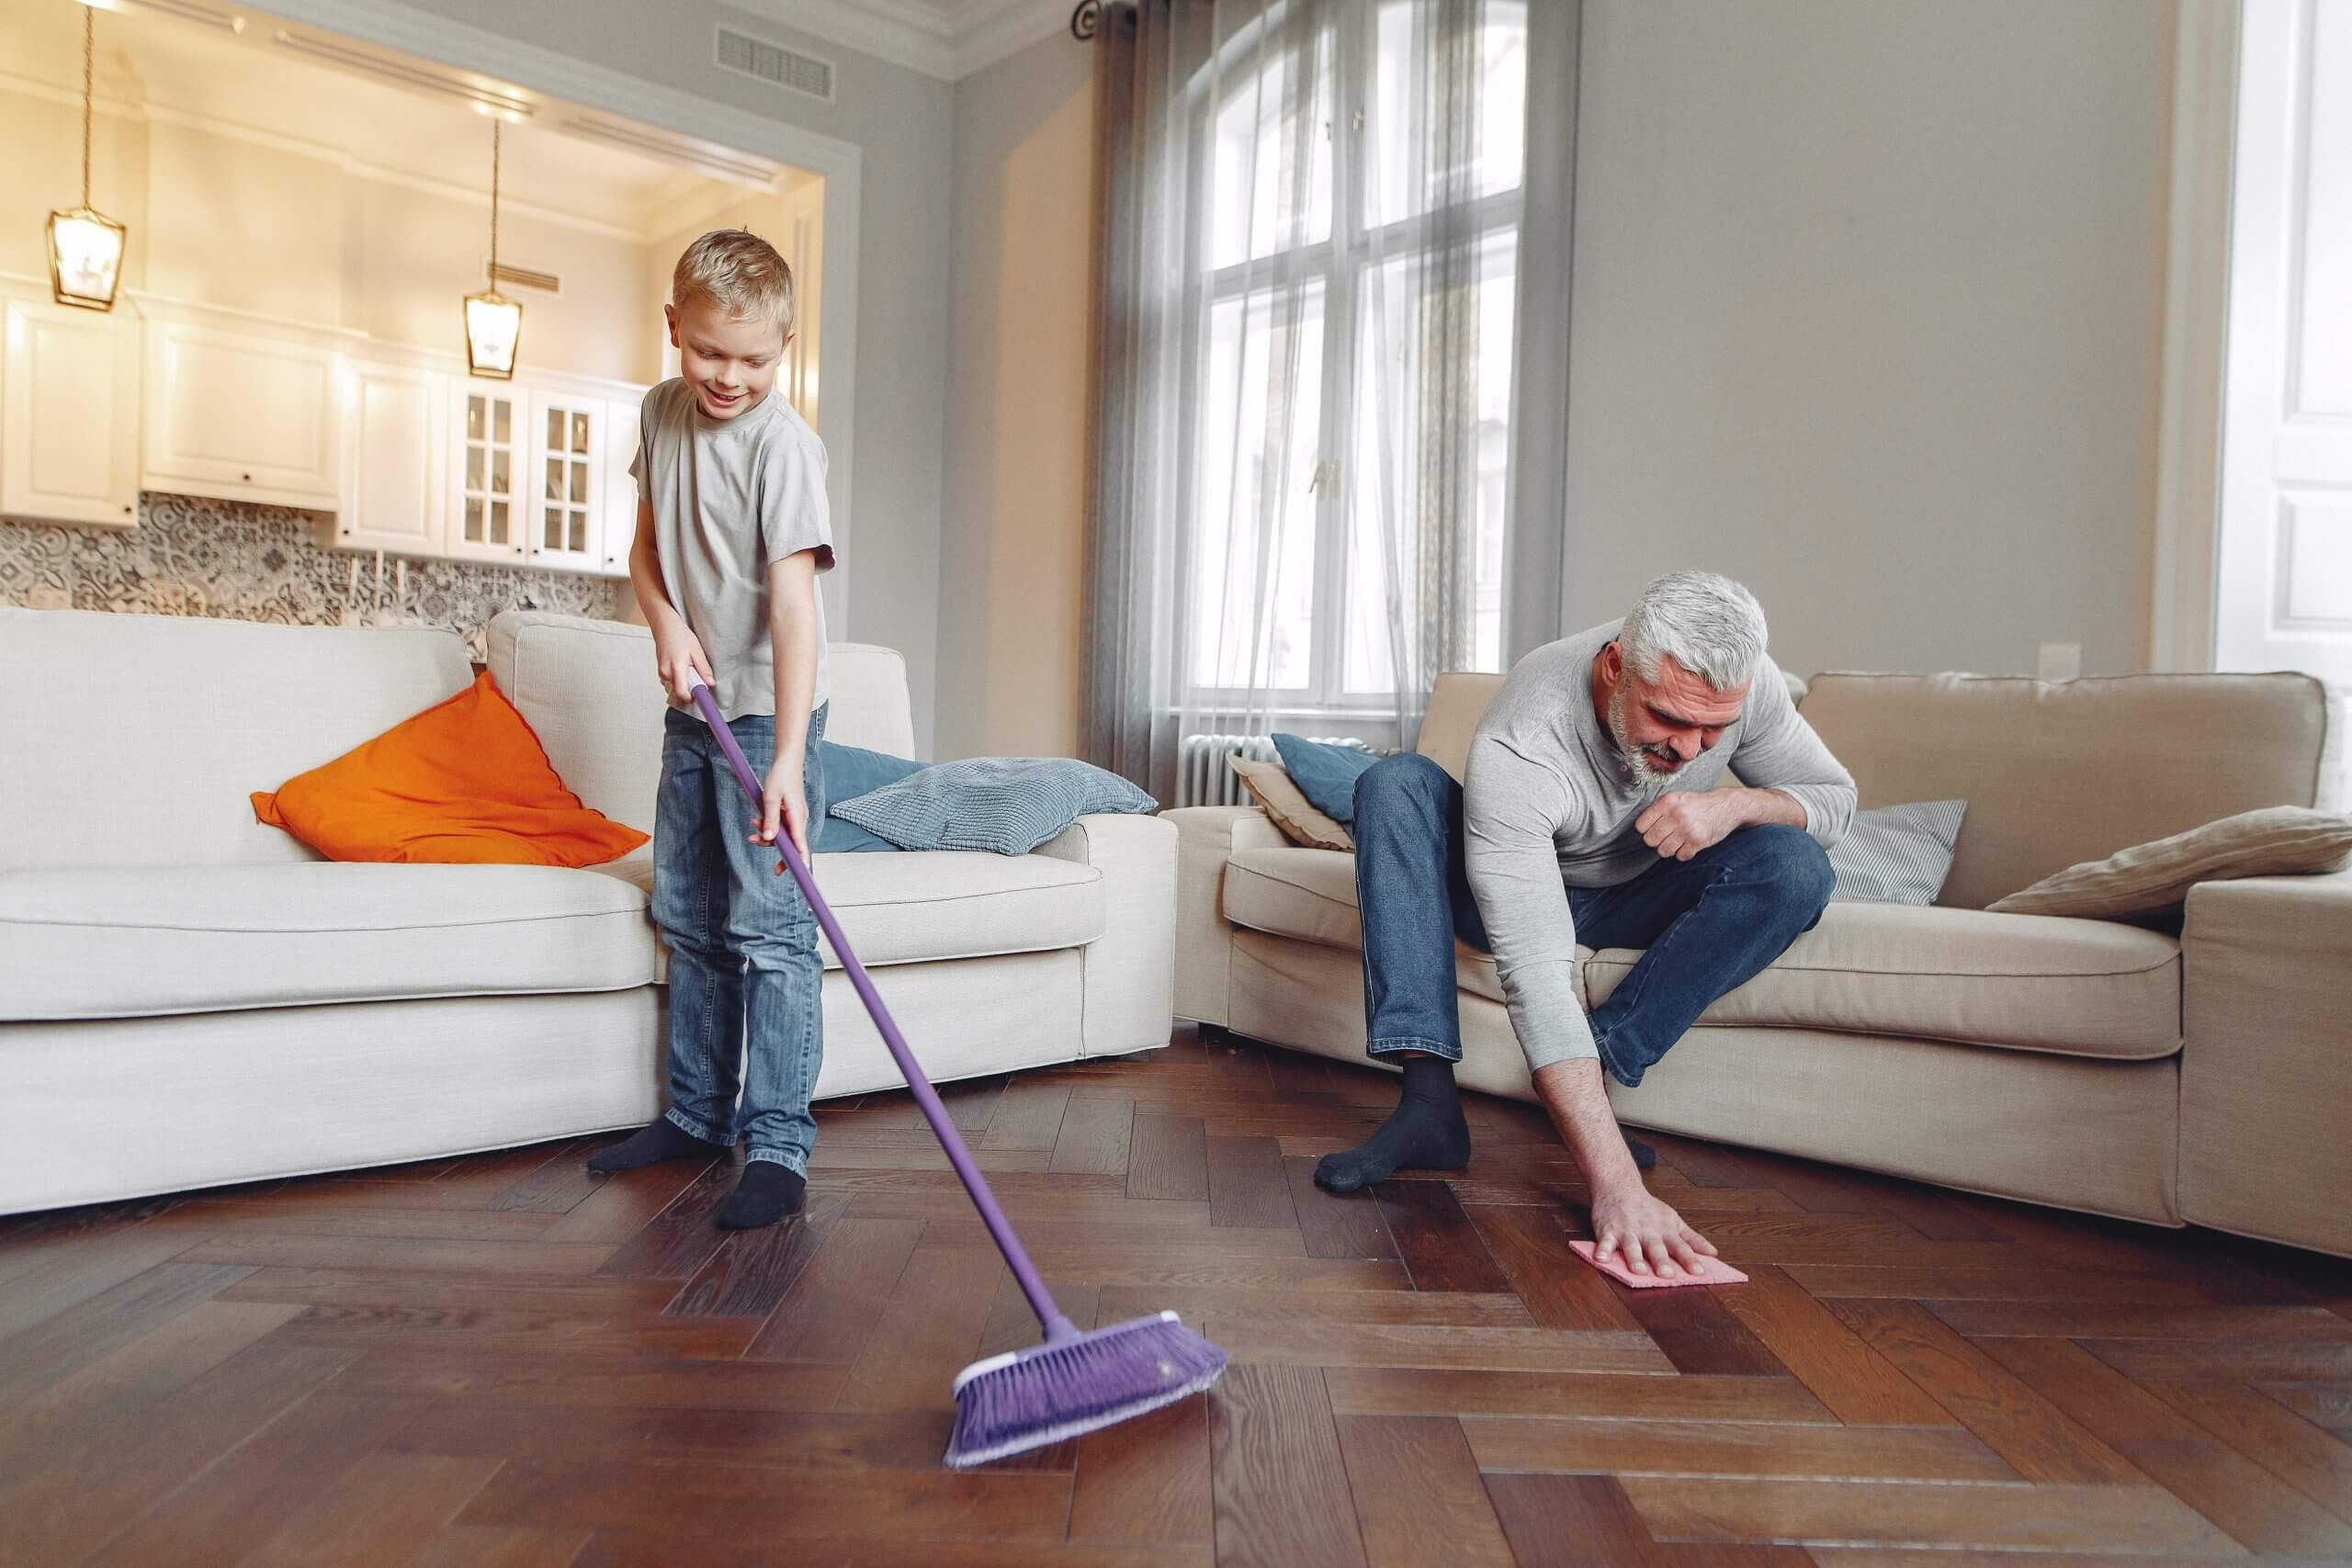 Canva - Photo Of Man Cleaning The Floor